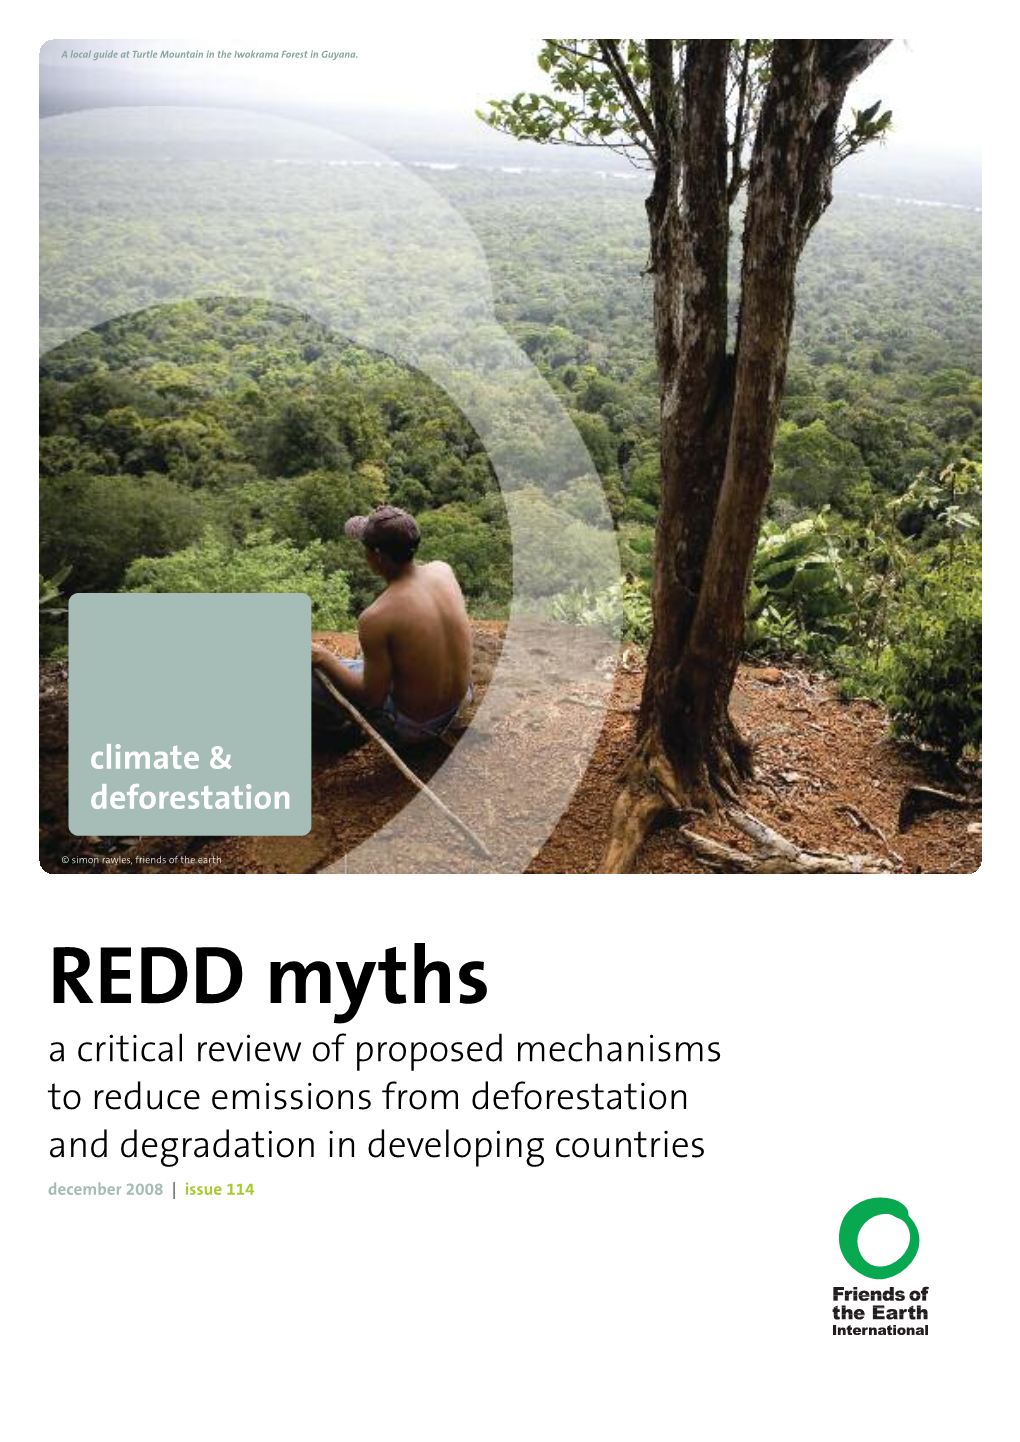 REDD Myths a Critical Review of Proposed Mechanisms to Reduce Emissions from Deforestation and Degradation in Developing Countries December 2008 | Issue 114